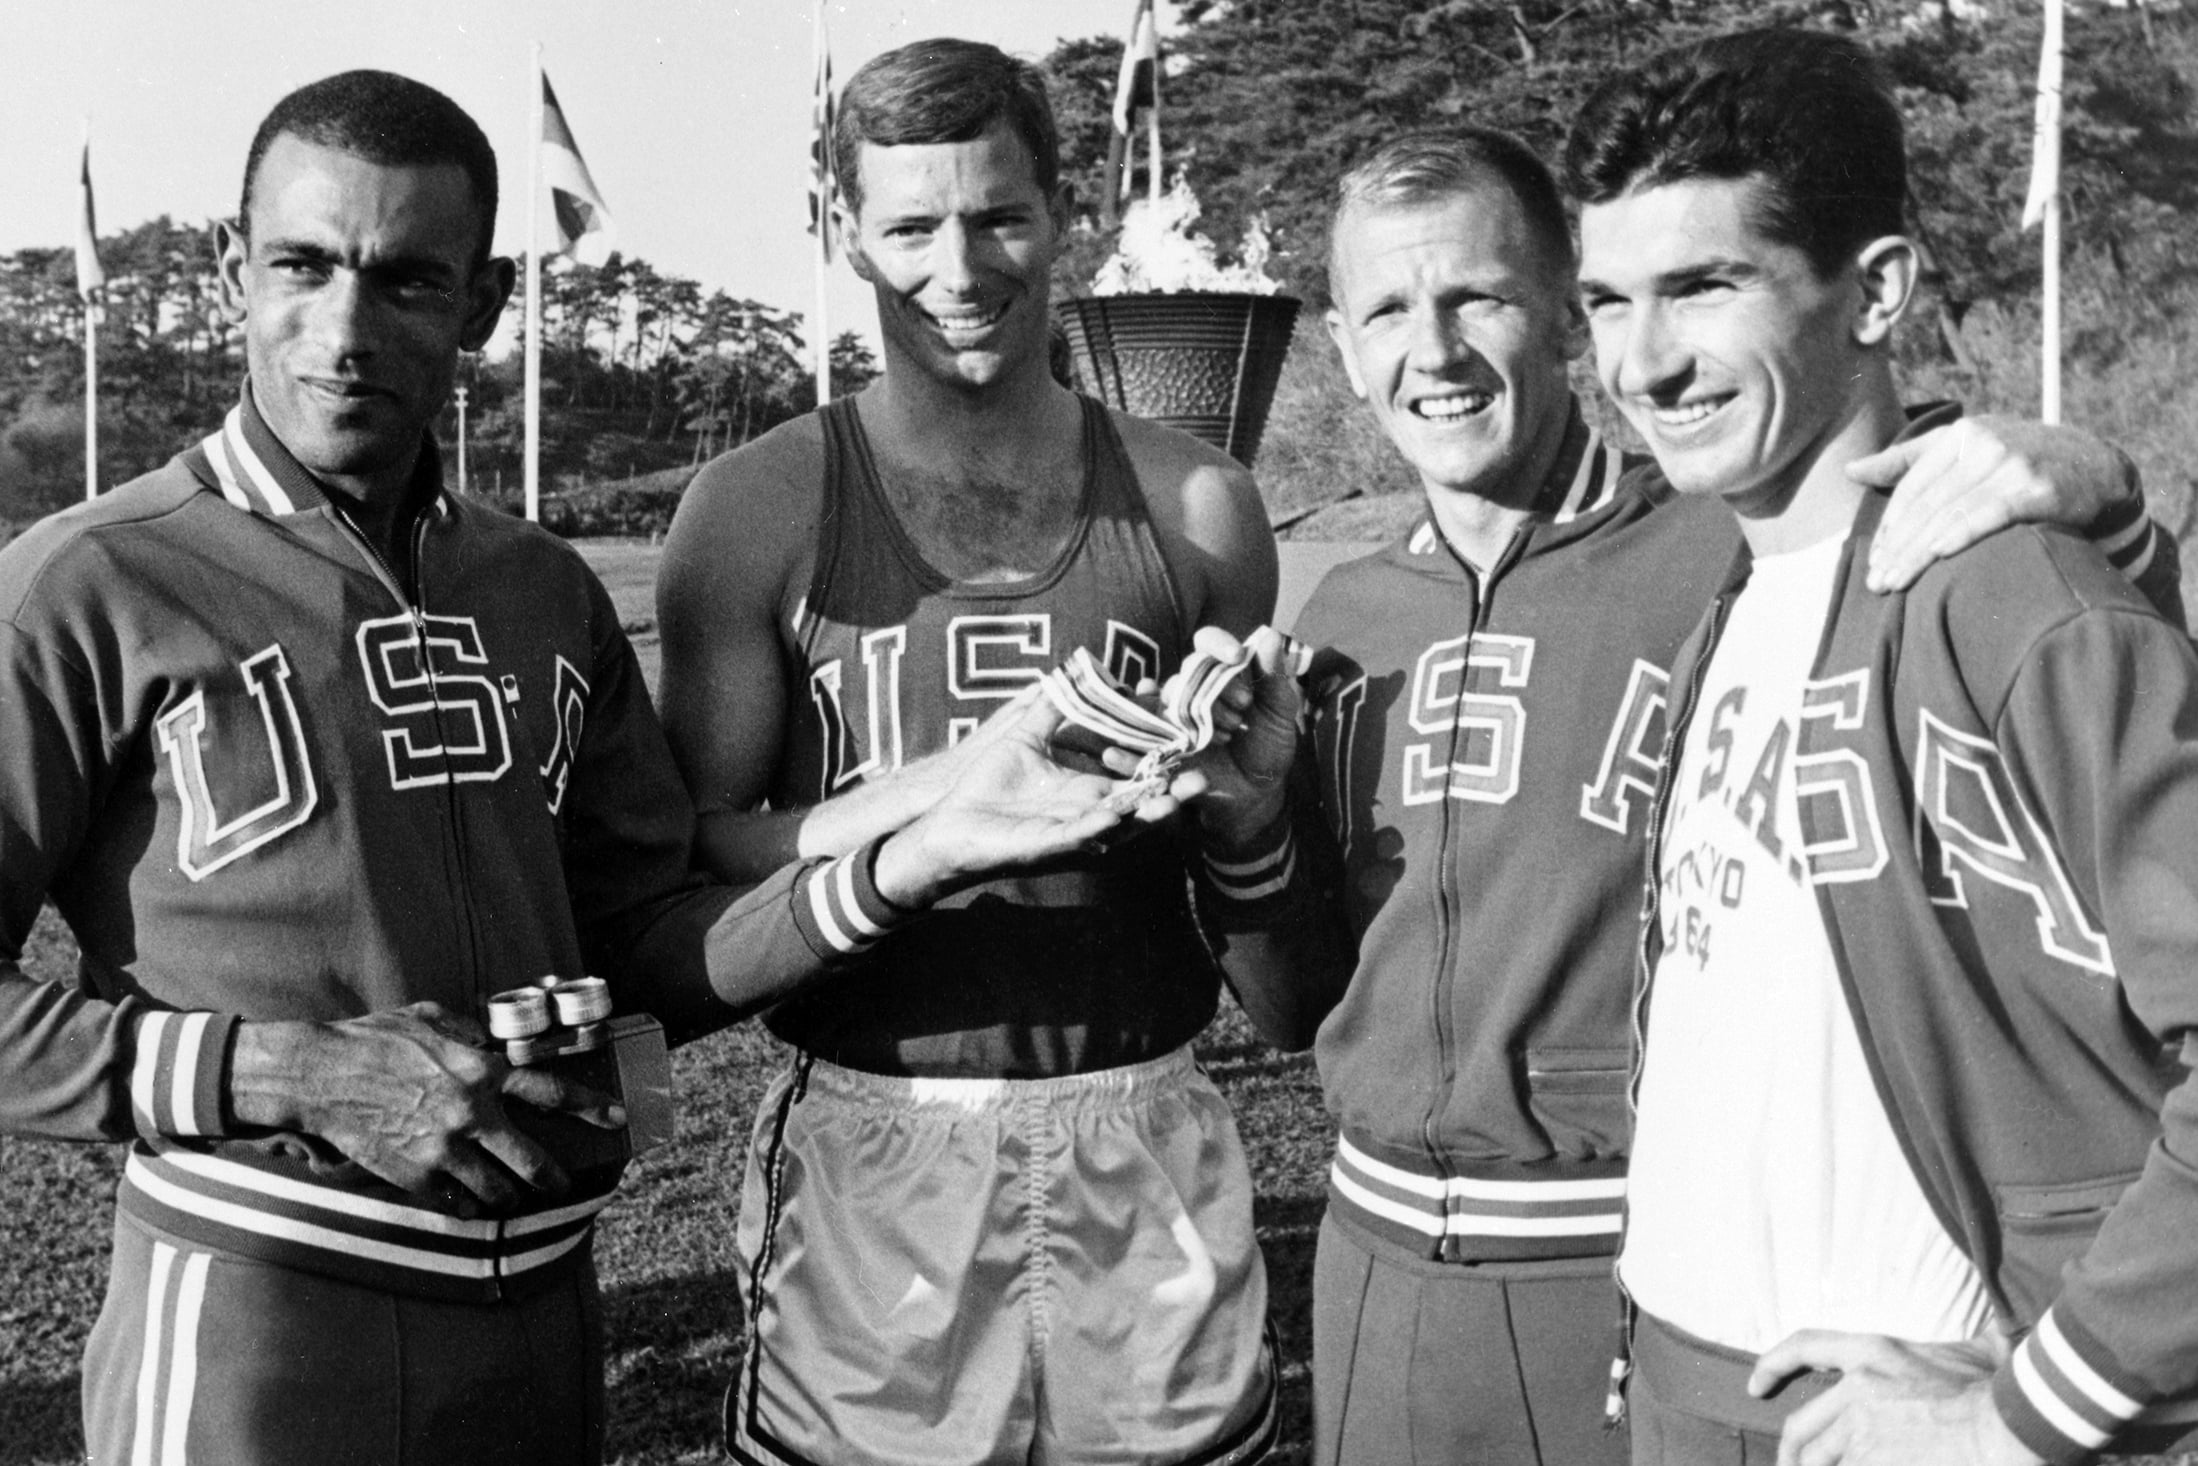 Jim Kerr (second from left) stands with his fellow members of the USA pentathlon team at the 1964 Olympics in Tokyo. The team took silver. (Photo courtesy of the U.S. Olympic and Paralympic Committee)